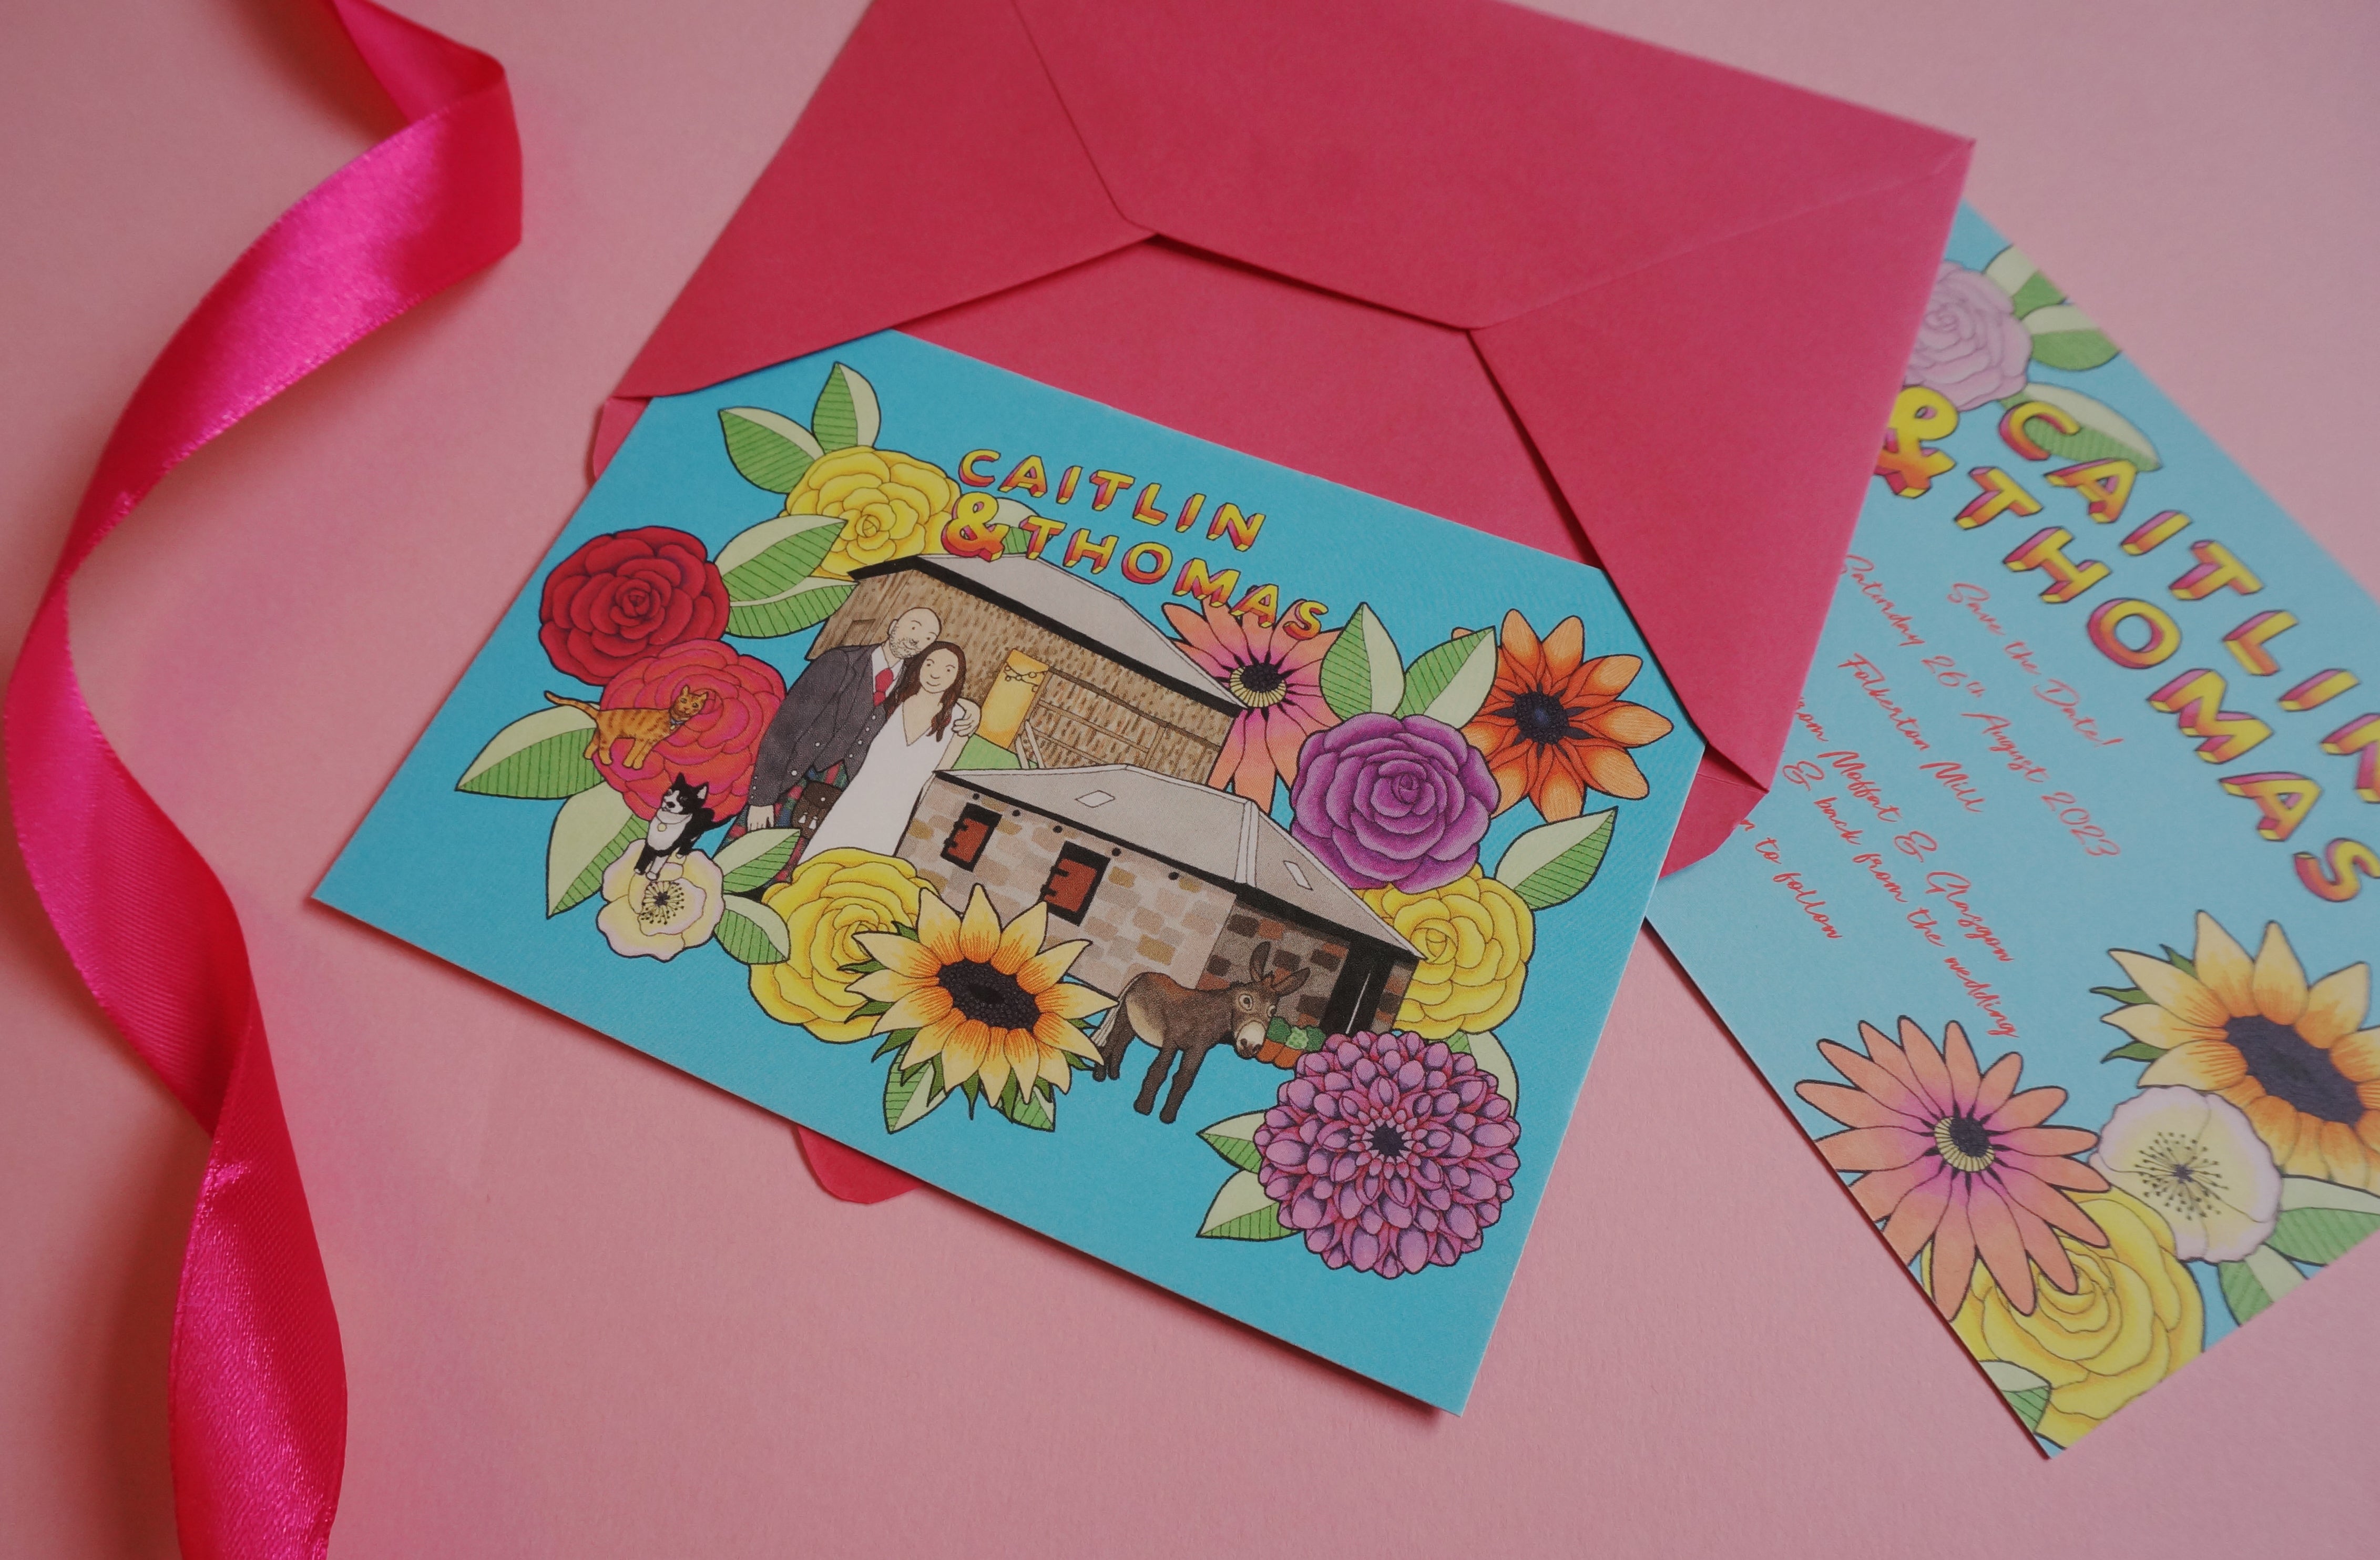 Colourful wedding save the date card.